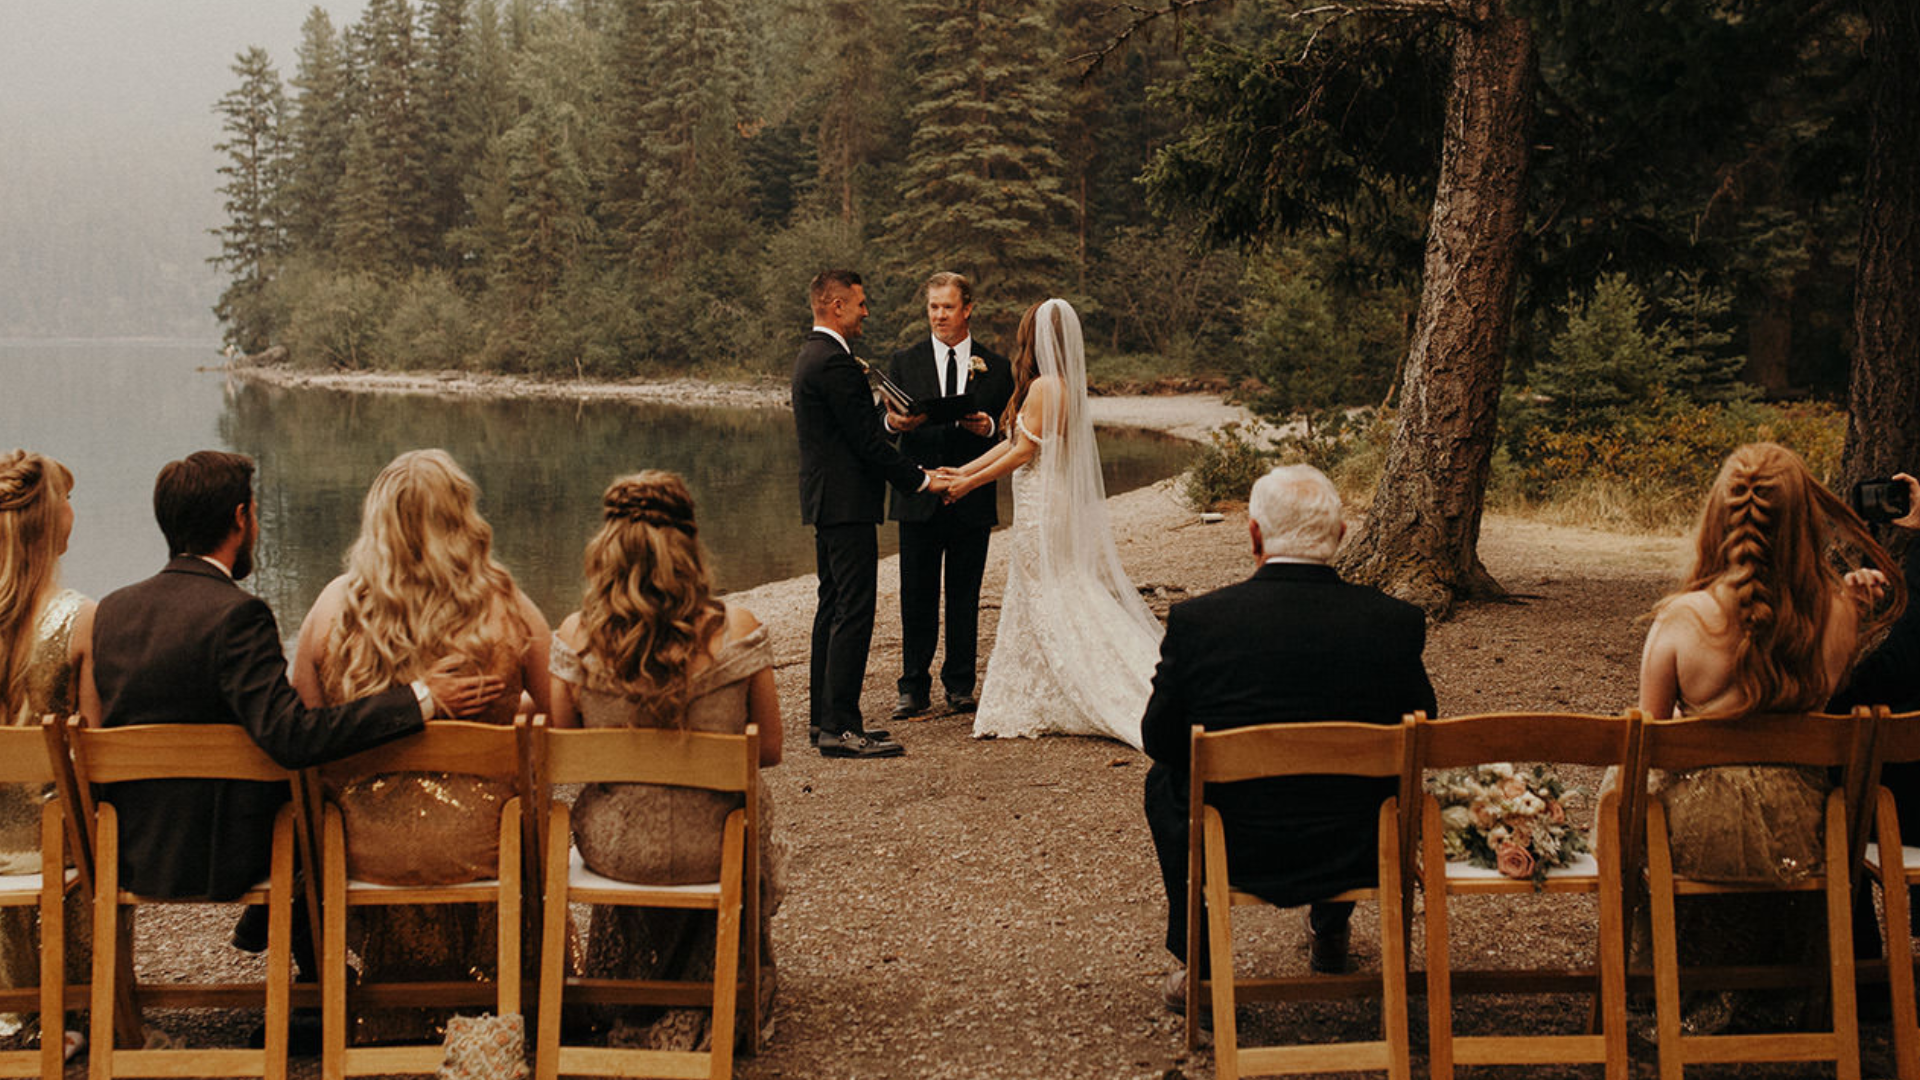 21 Untraditional Wedding Readings That Will Make Your Ceremony Unforgettable